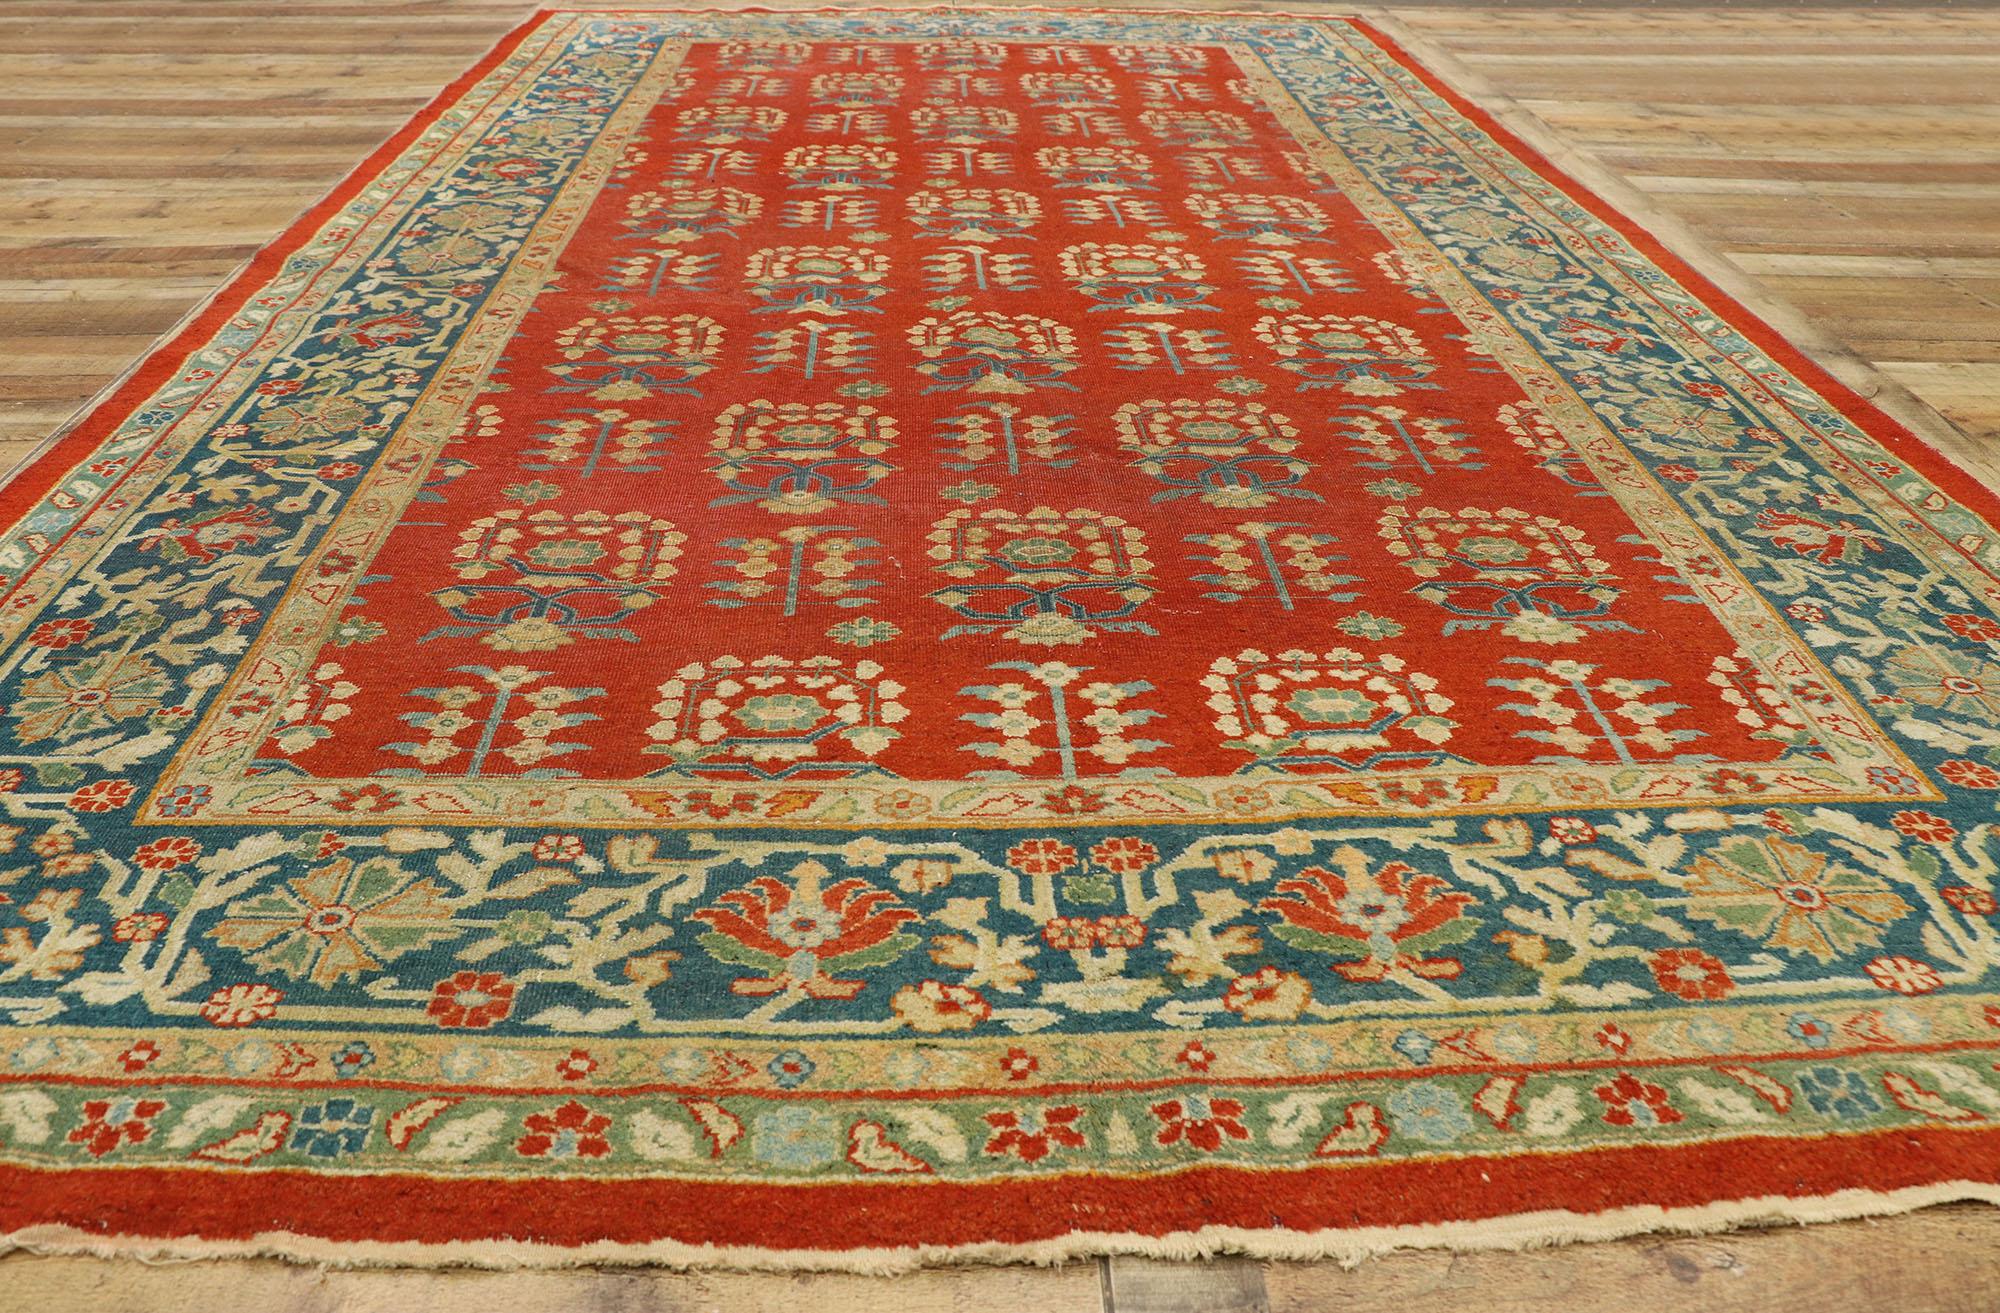 Antique Red Indian Agra Rug  1